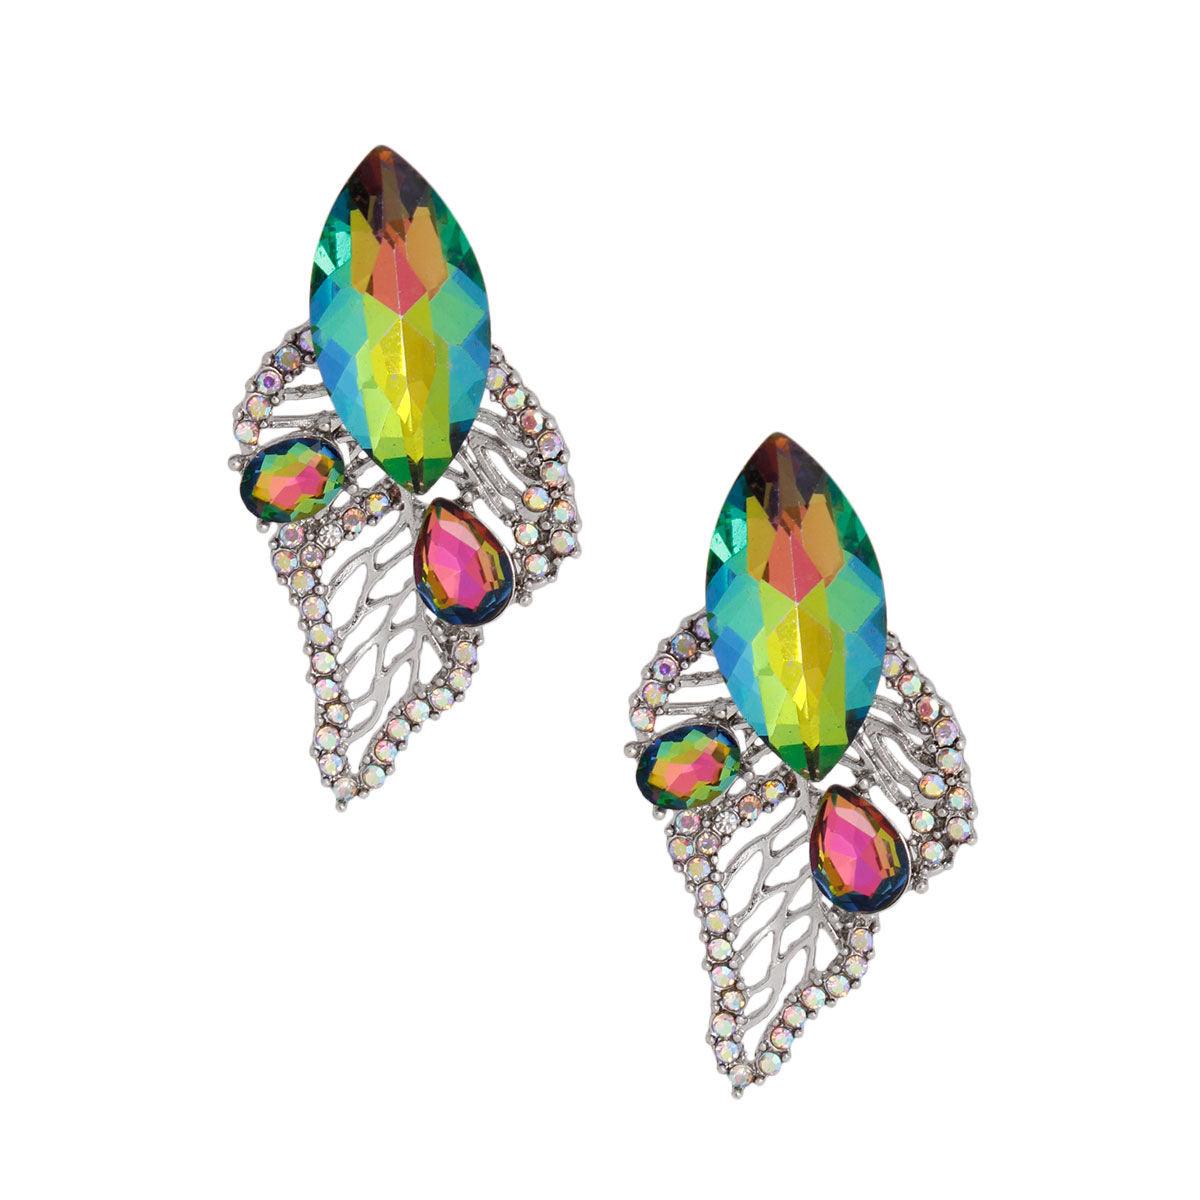 Shop Now: Trendy Pink and Green Silver Leaf Stud Earrings